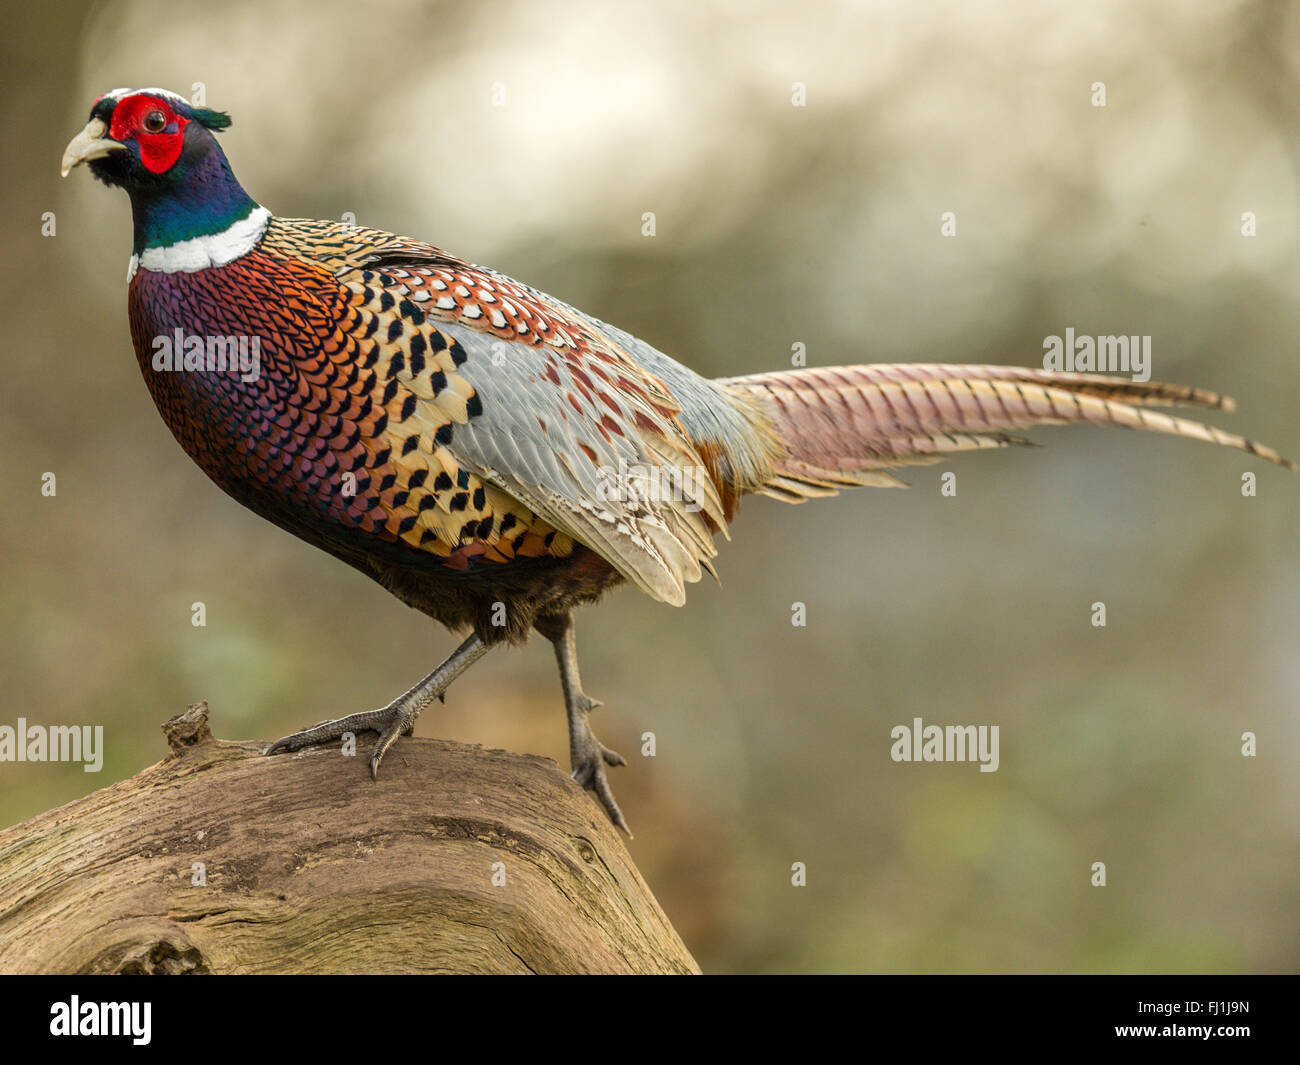 Beautiful Male Ring-necked Pheasant (Phasianus colchicus) 'Depicted posing on a wooden log'. Isolated against woodland backdrop. Stock Photo